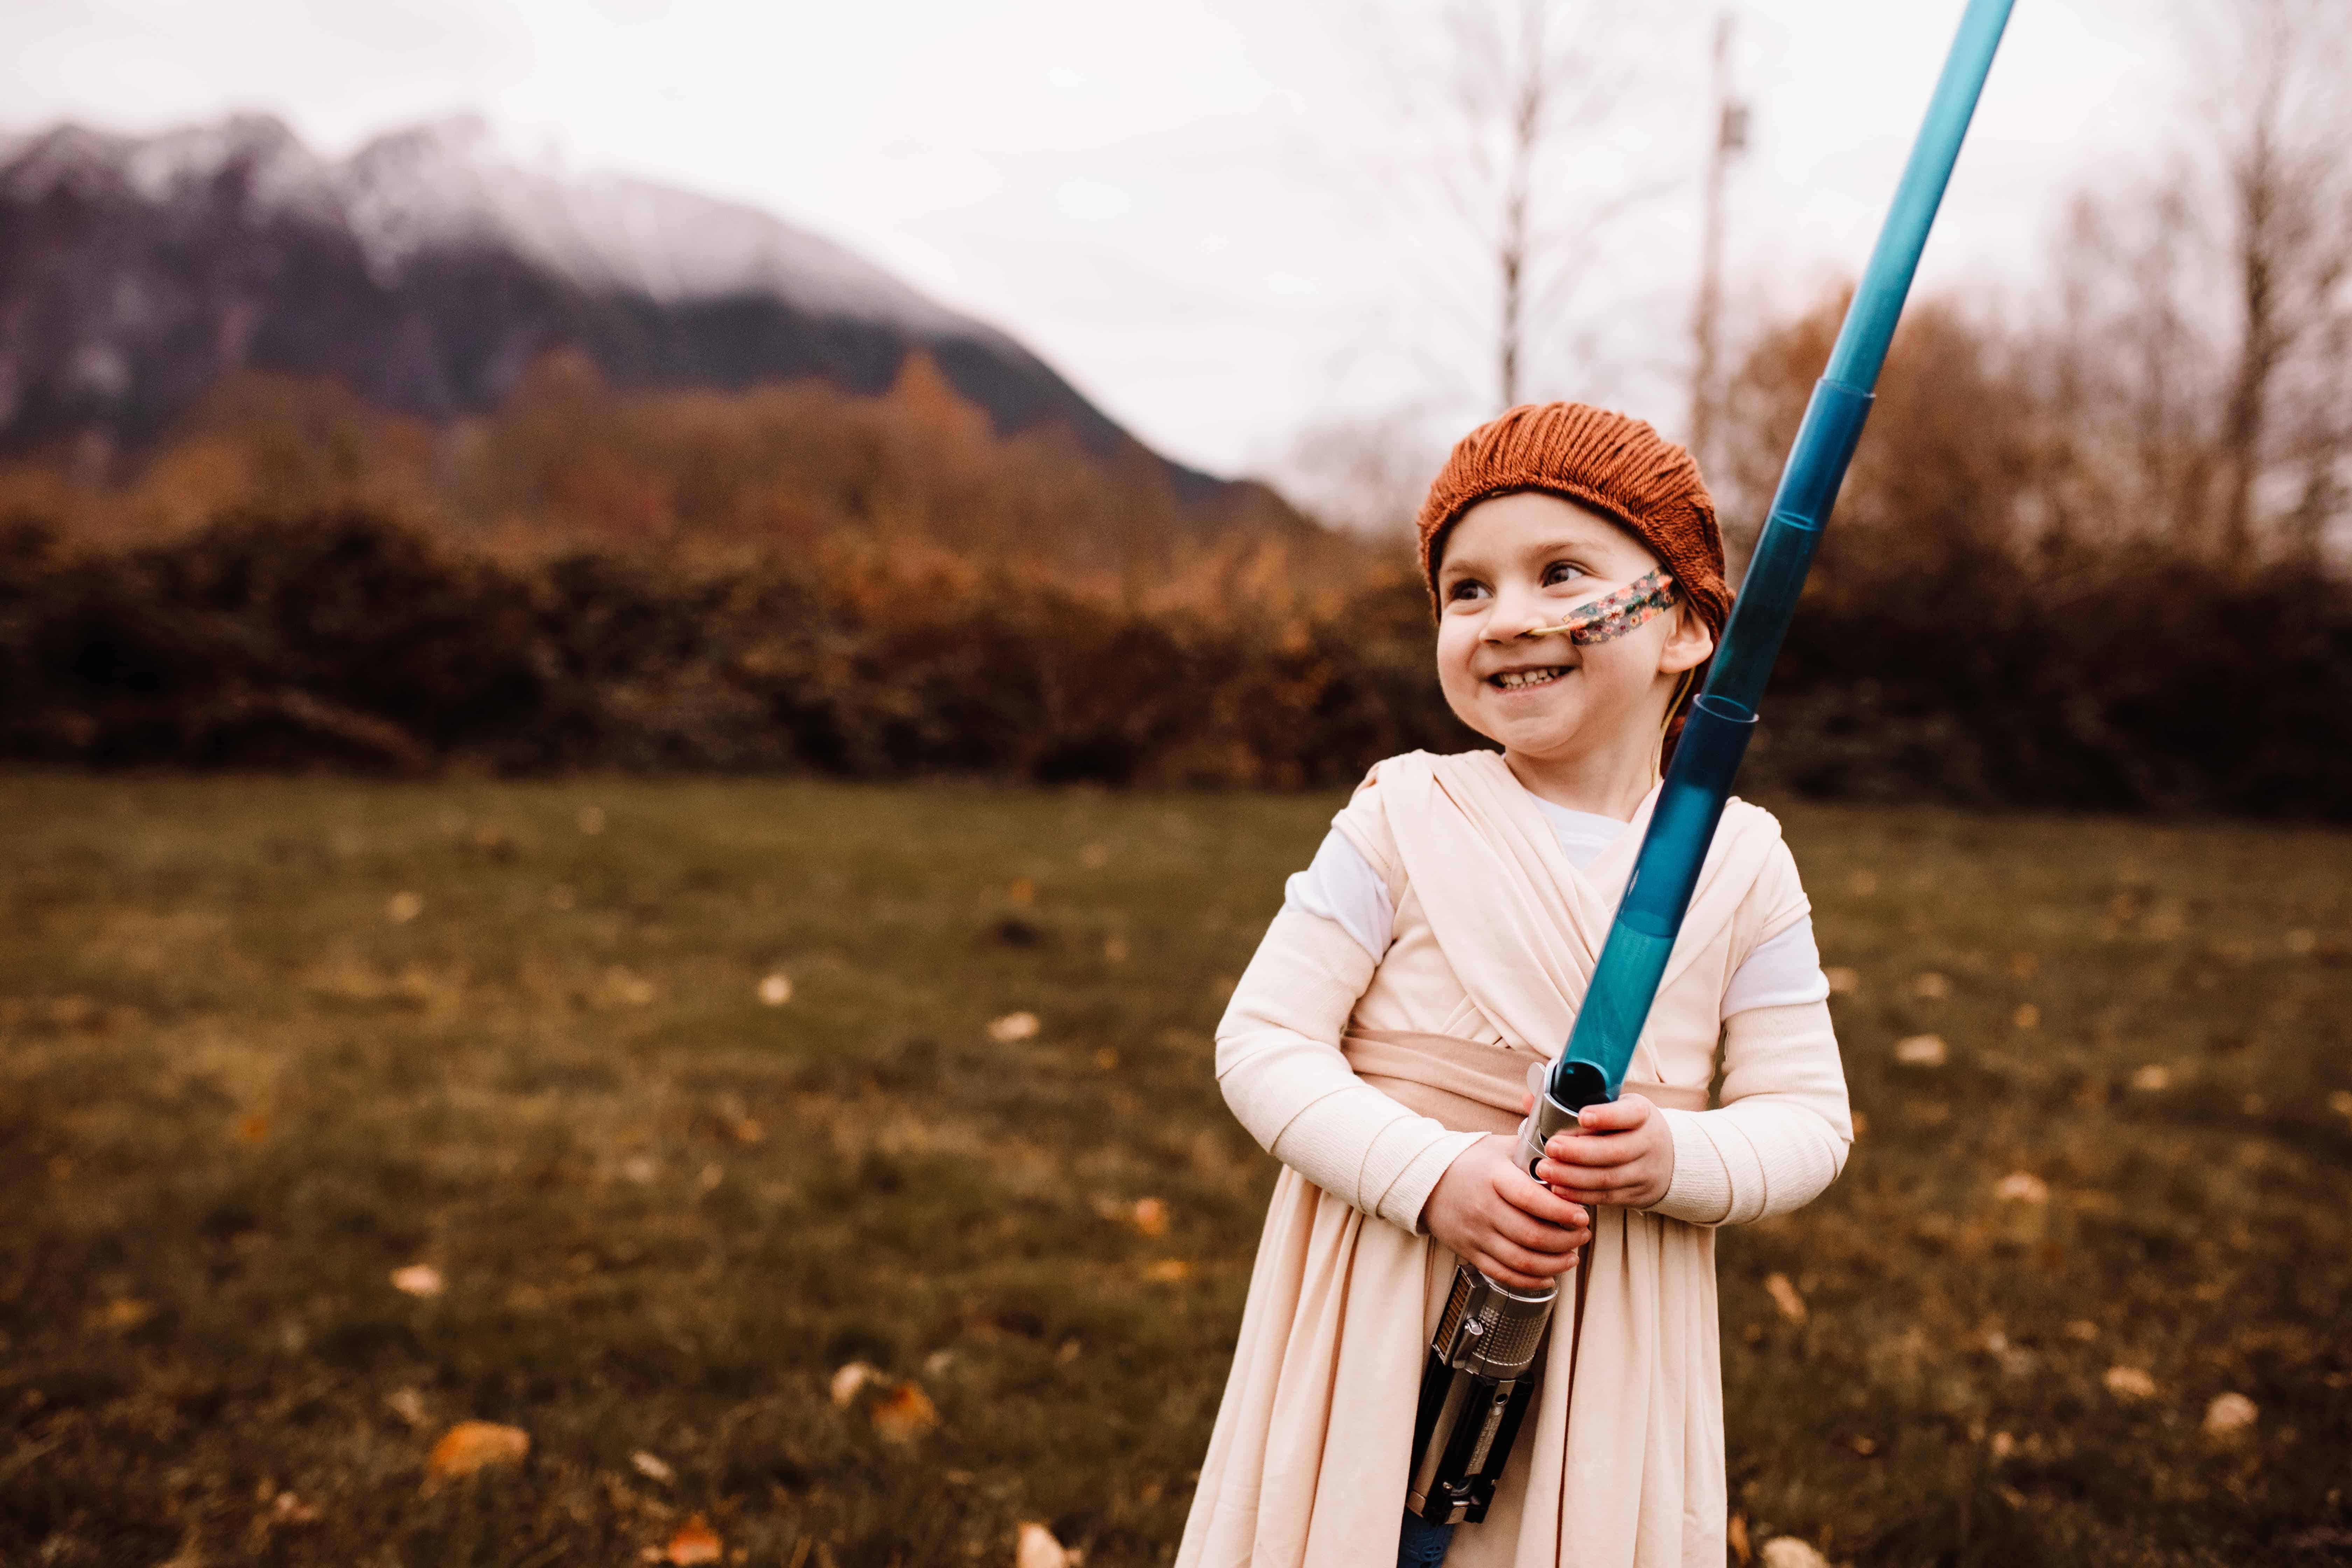 Amanda Orleman Photography donating photo sessions to childhood cancer patients